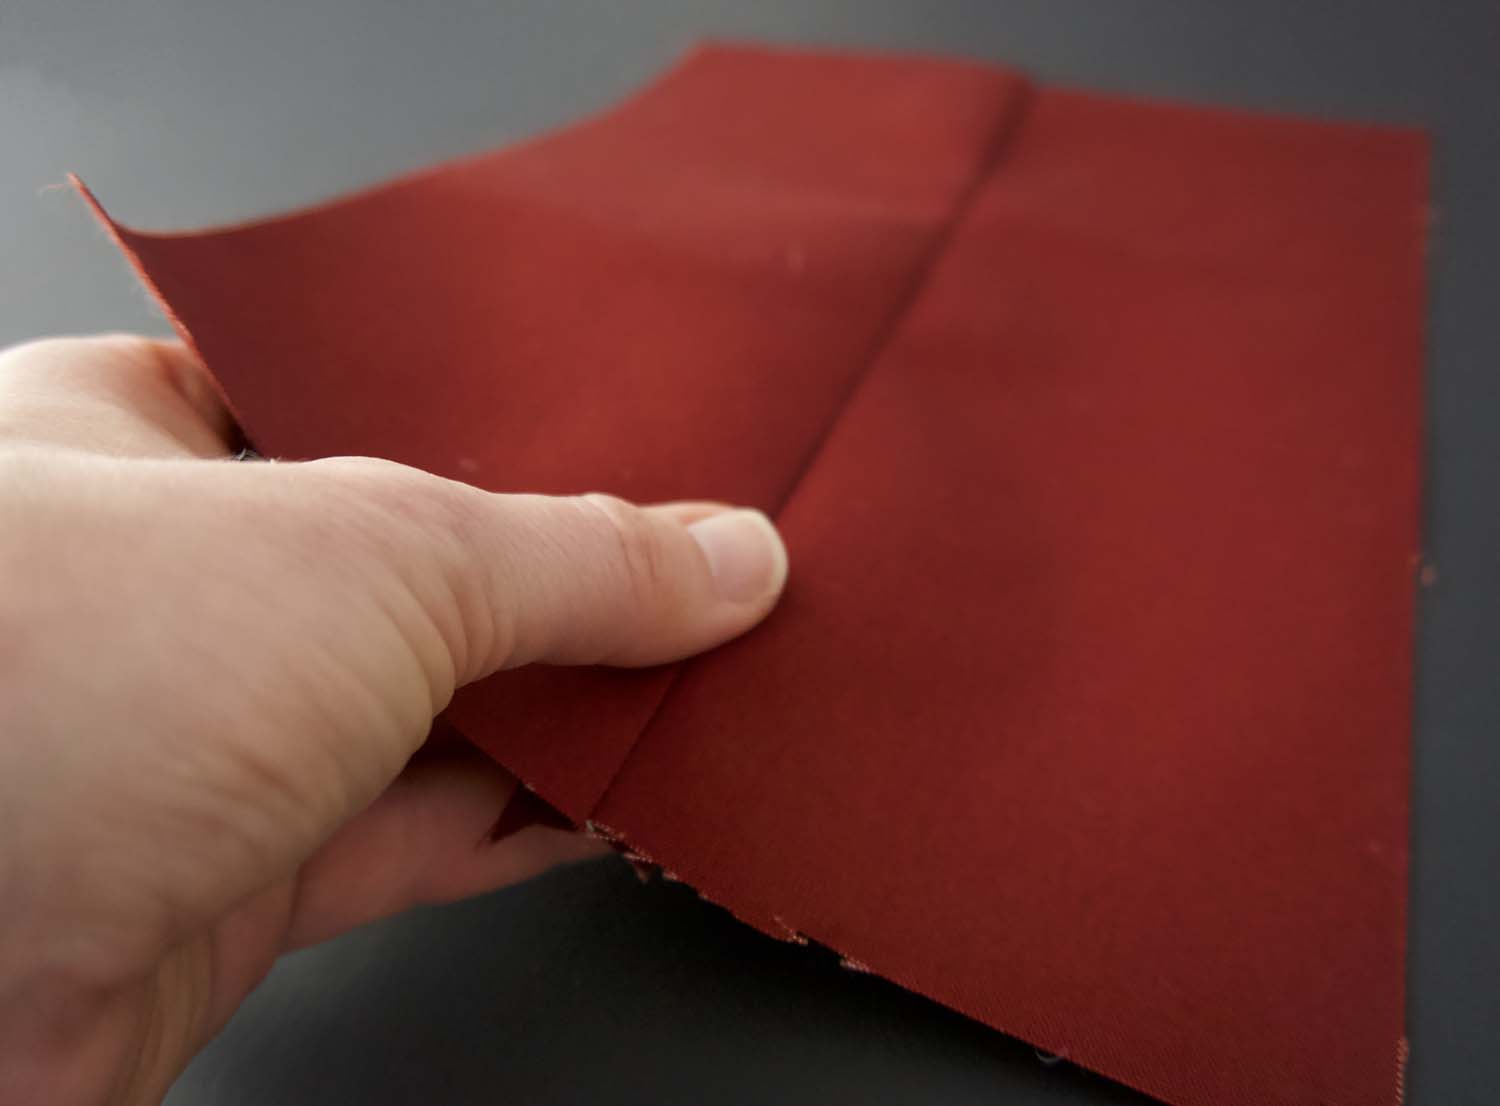 a picture of a thumb pressing down a seam on some dark red oilskin